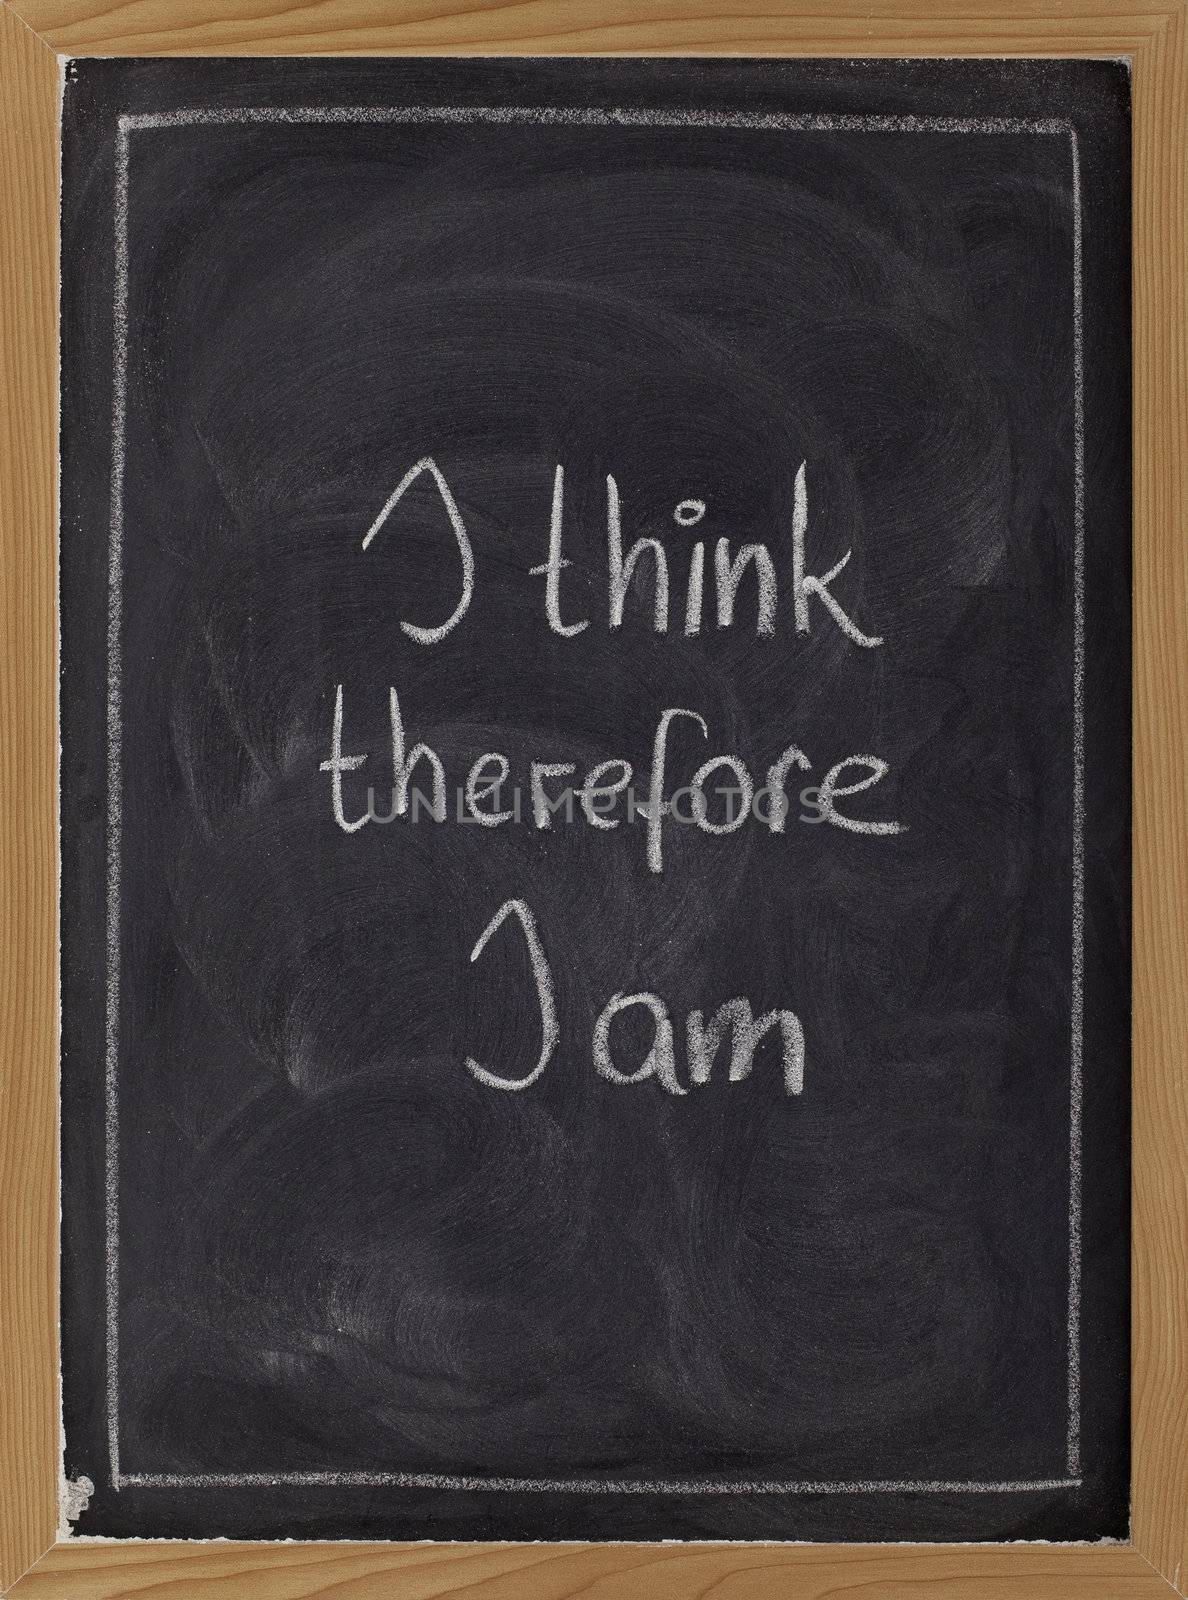 I think, therefore I am - philosophical statement used by Rene Descartes; white chalk handwriting on blackboard